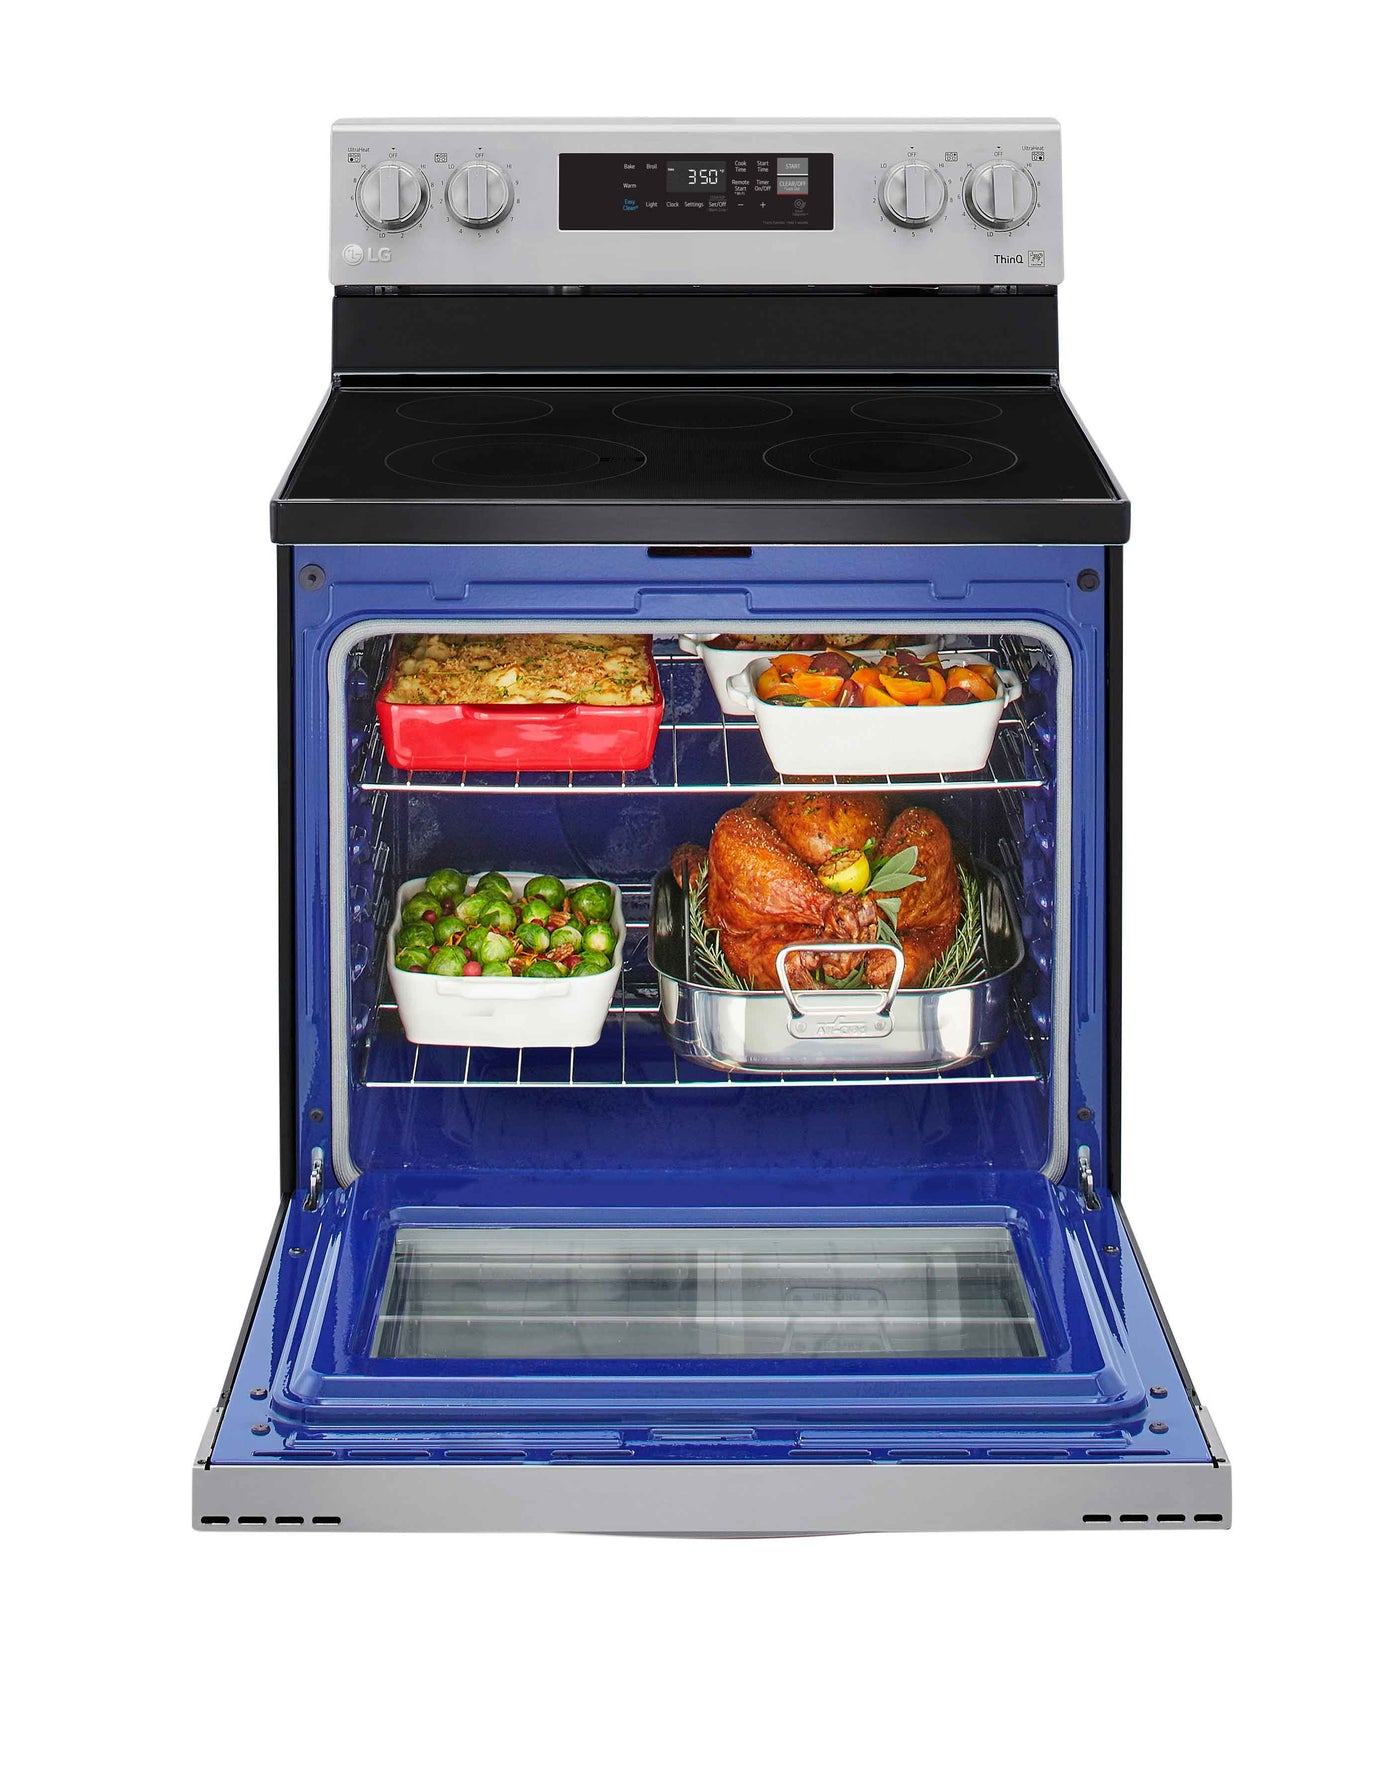 LG Stainless Steel 6.3 cu ft. Electric ThinQ® Range with EasyClean -LREL6321S